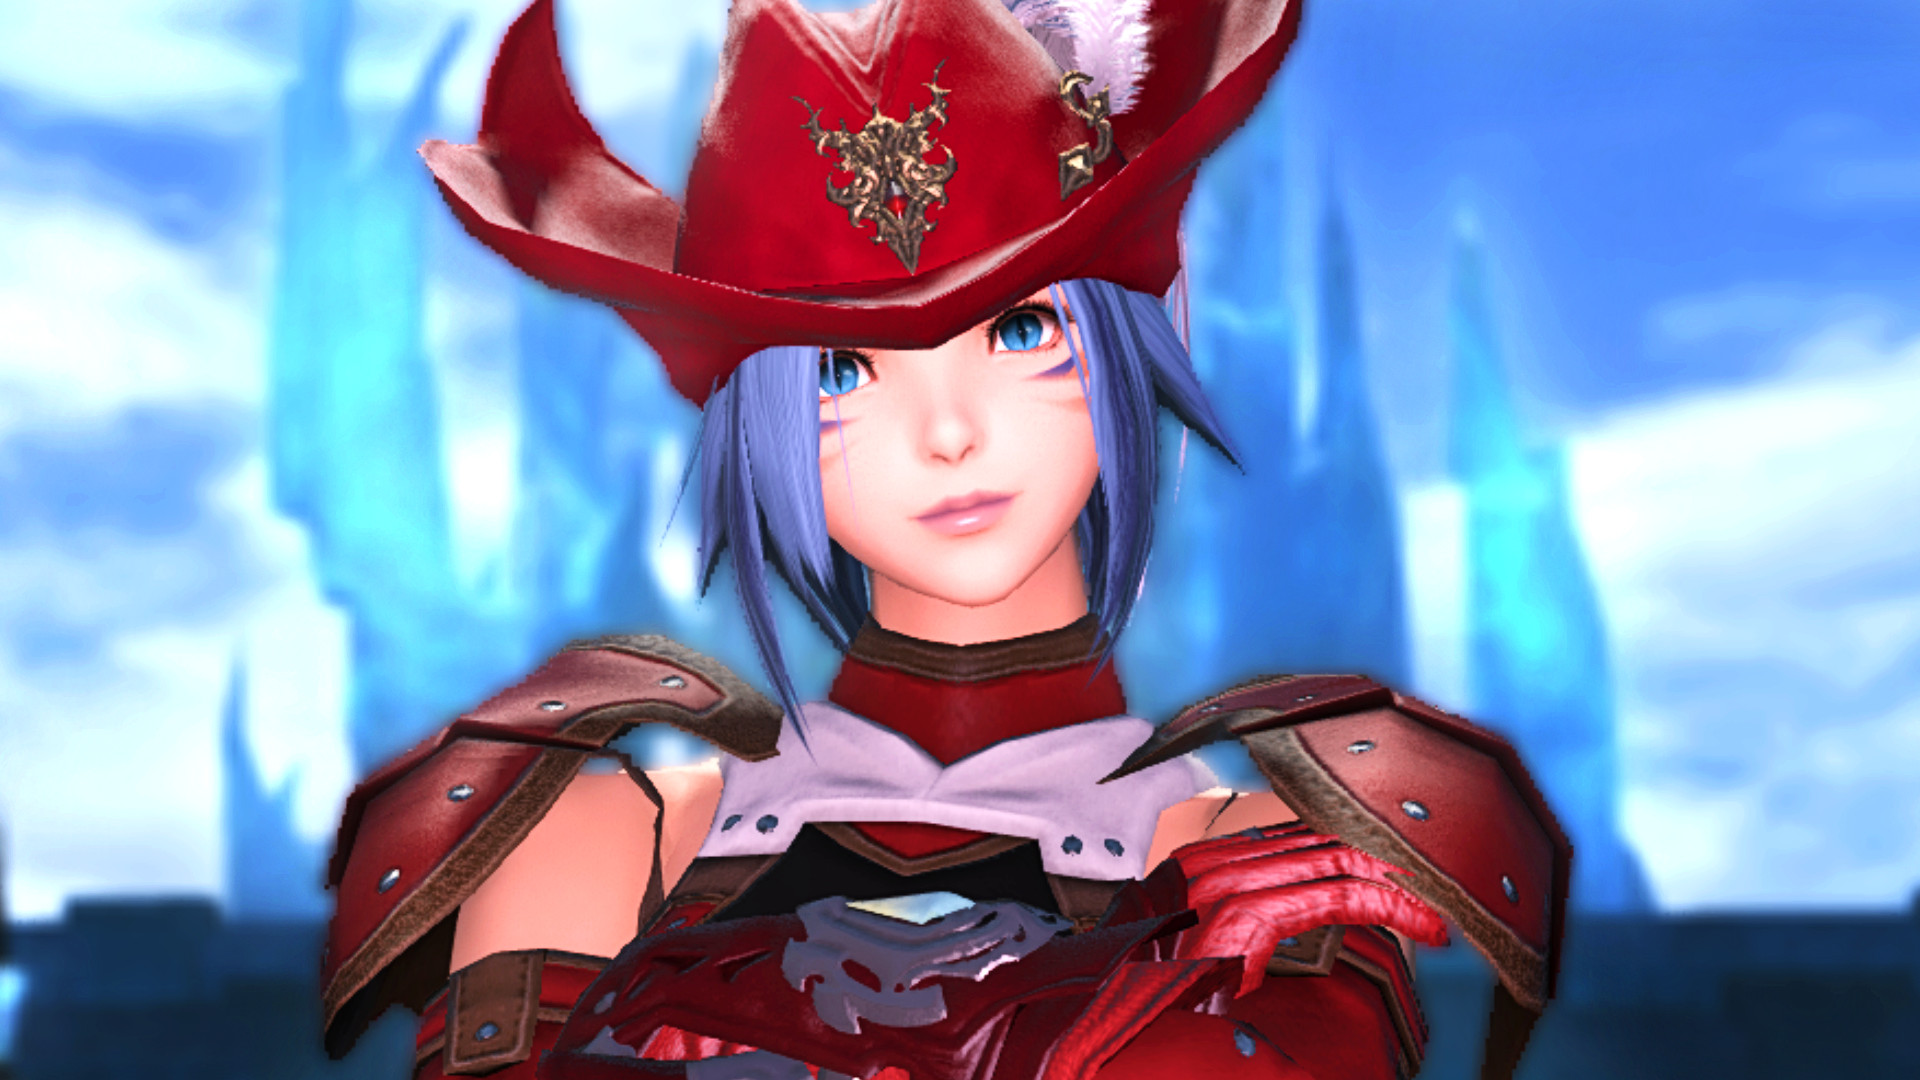 FFXIV deep dungeon expert shares their Eureka Orthos tips and thoughts